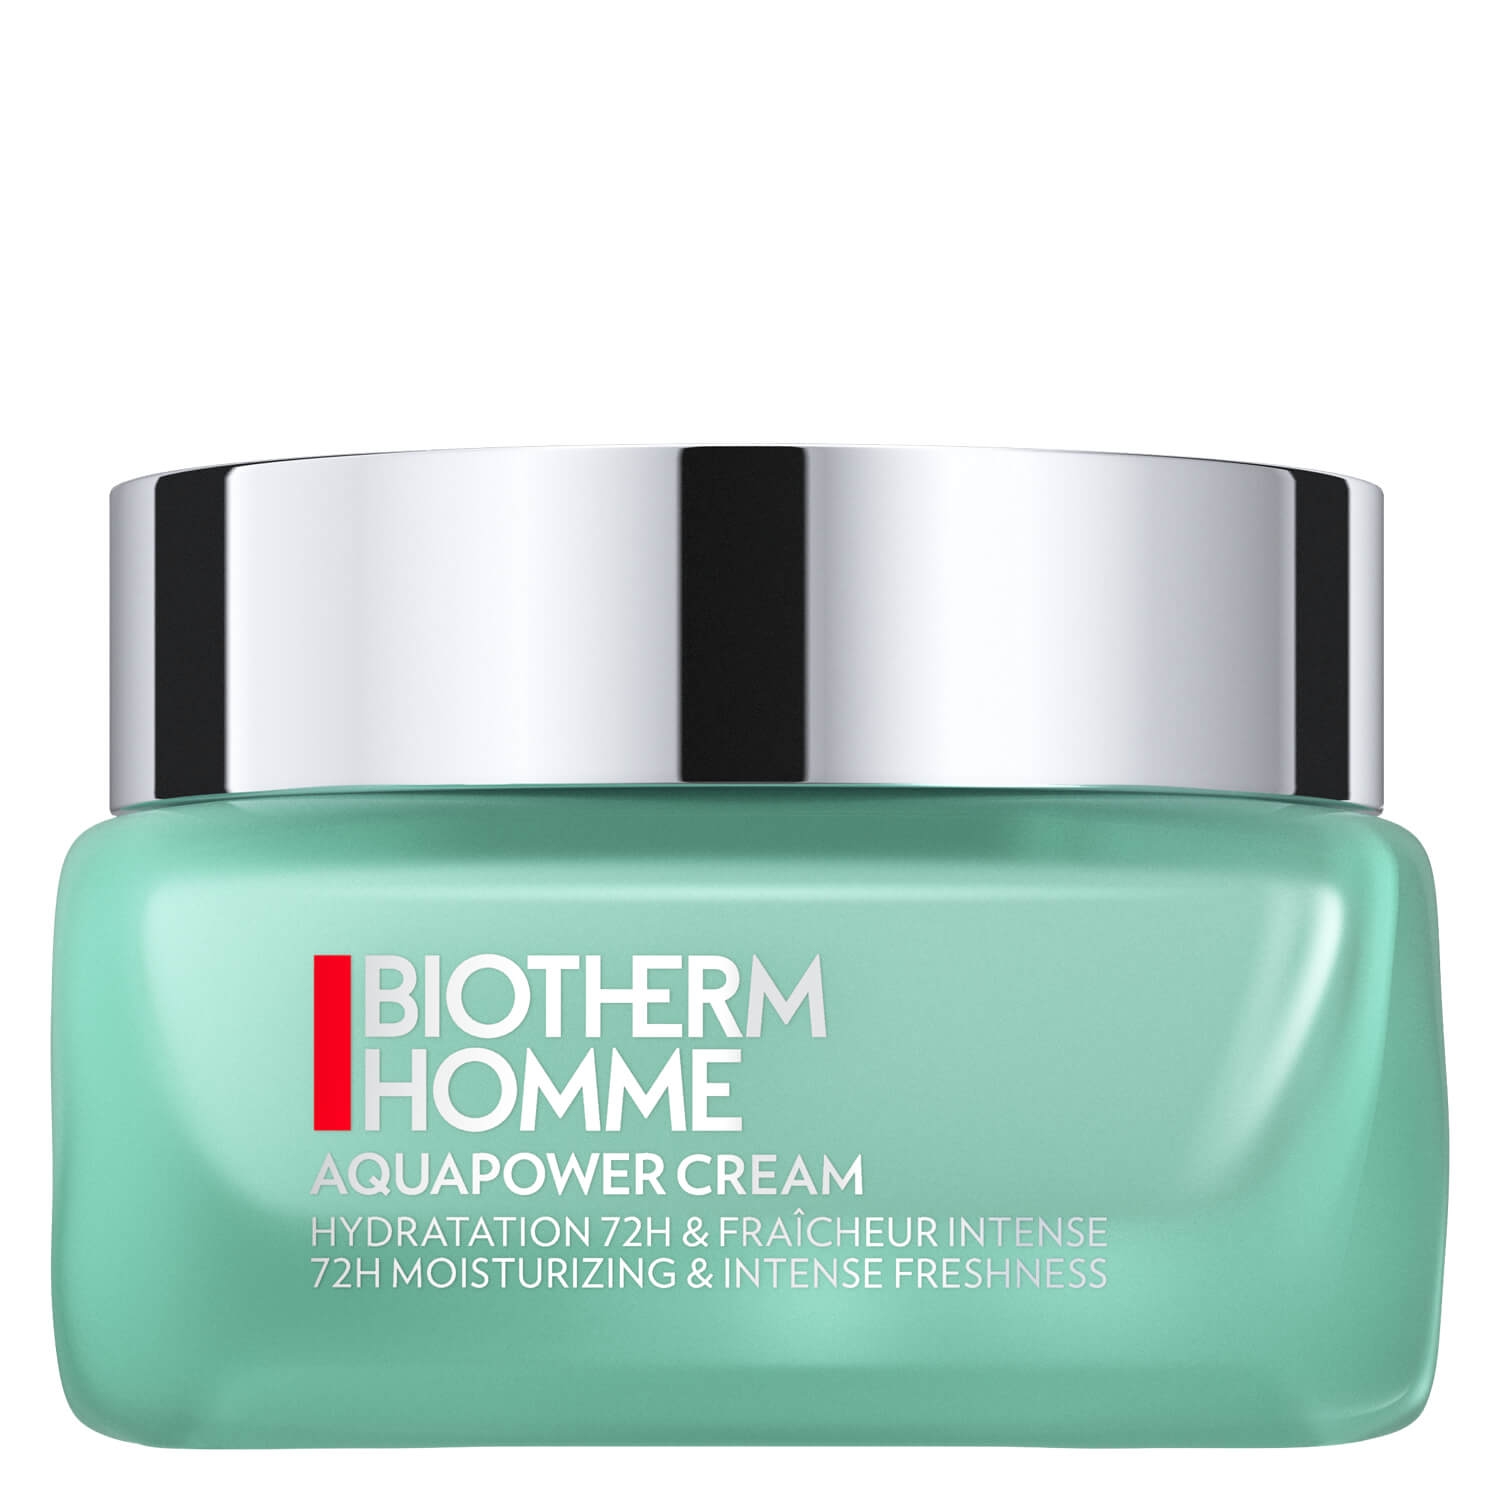 Product image from Biotherm Homme - Aquapower Cream Hydrator 72H